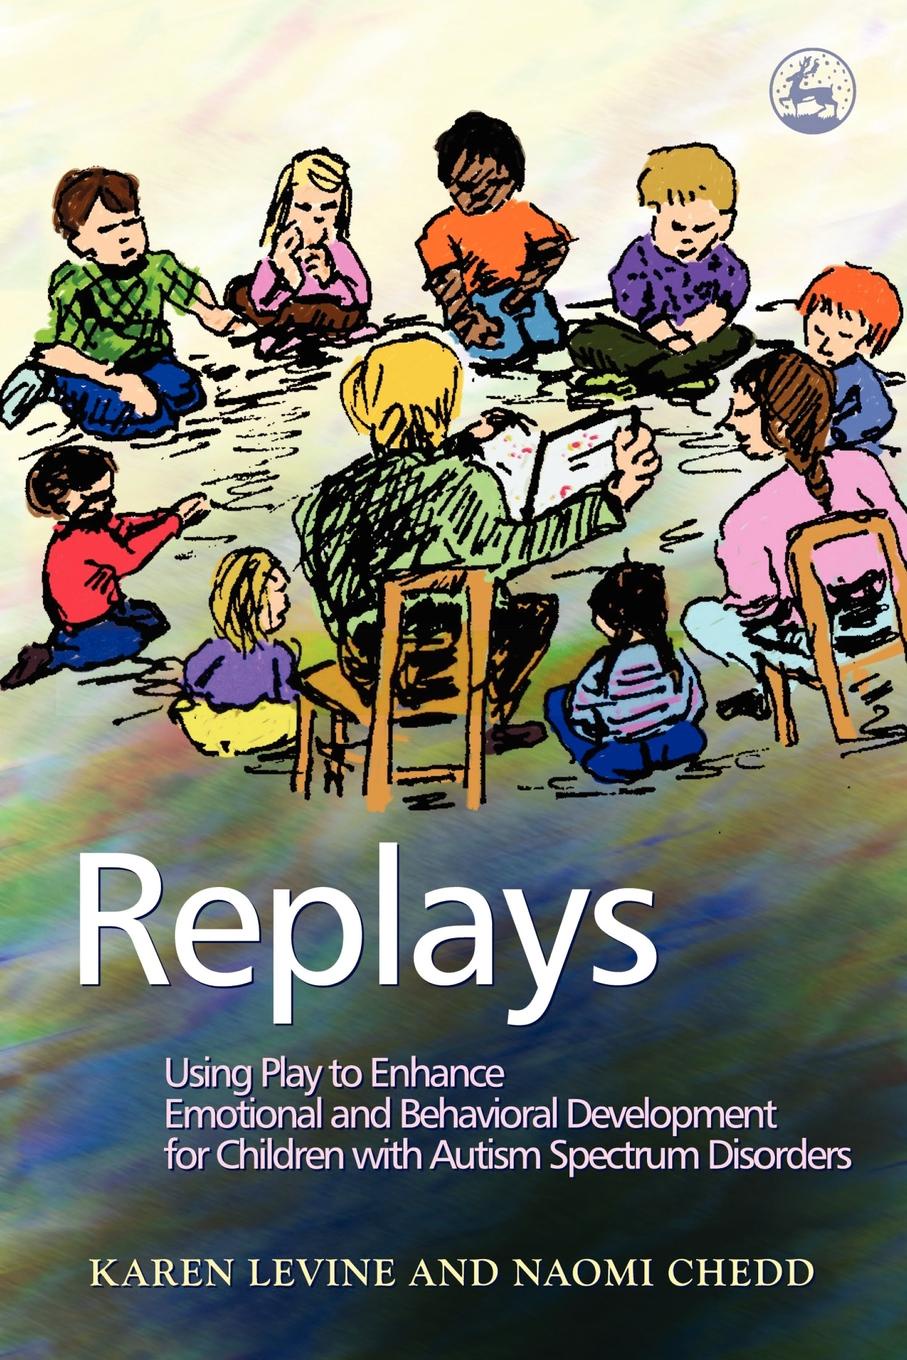 Replays. Using Play to Enhance Emotional and Behavioral Development for Children with Autism Spectrum Disorders